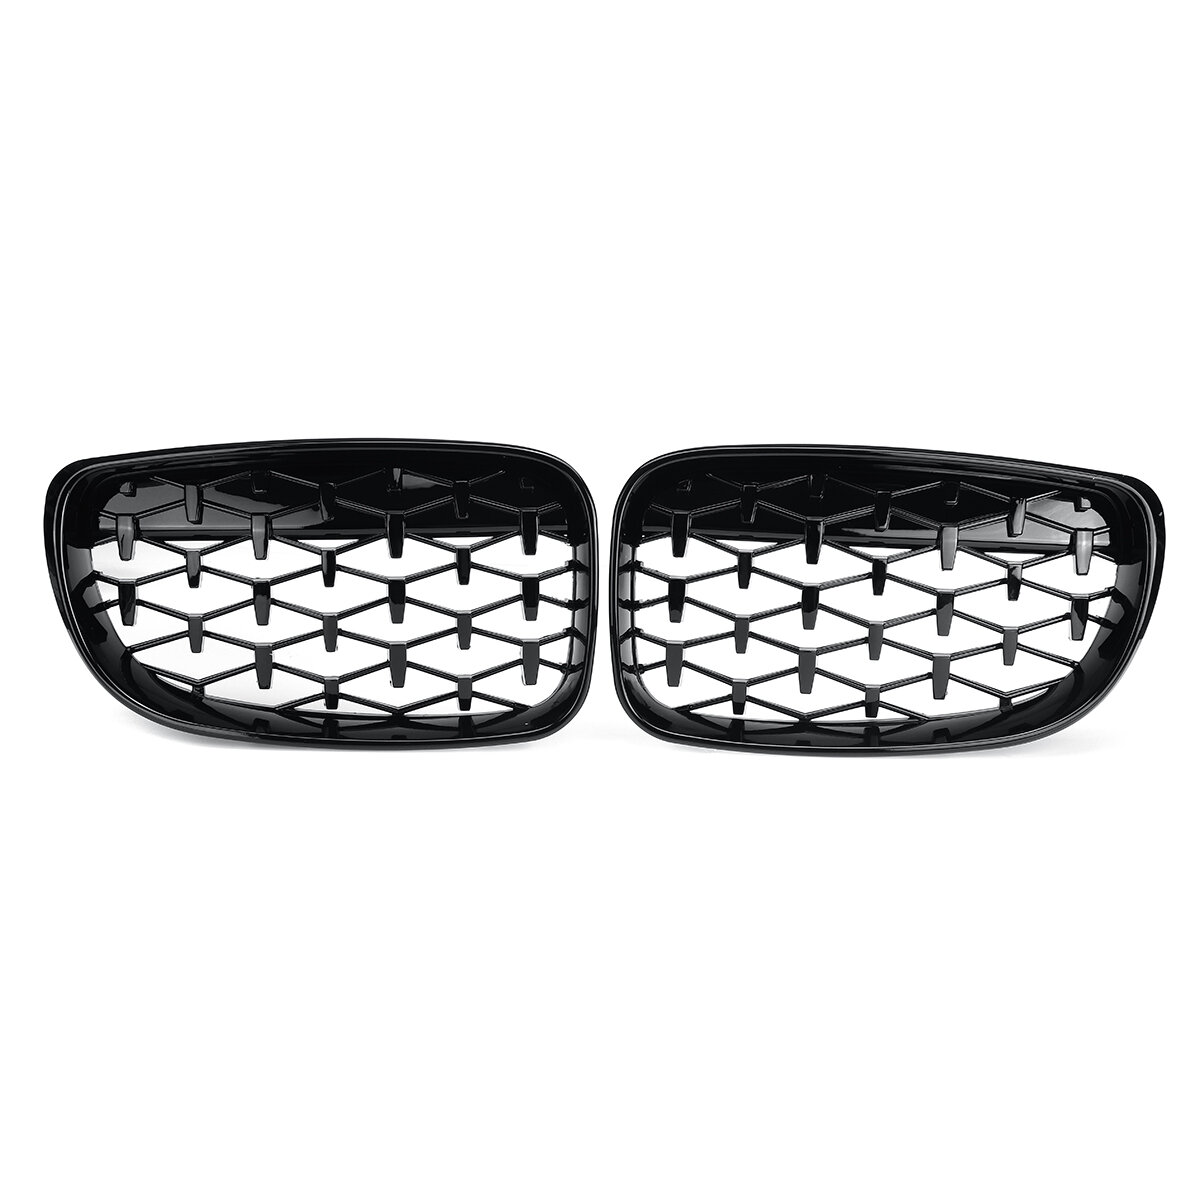 Image of Pair Glossy Black Car Front Kidney Grill Grilles Diamond Style For BMW 1 Series E81 E82 E87 E88 2007-2013